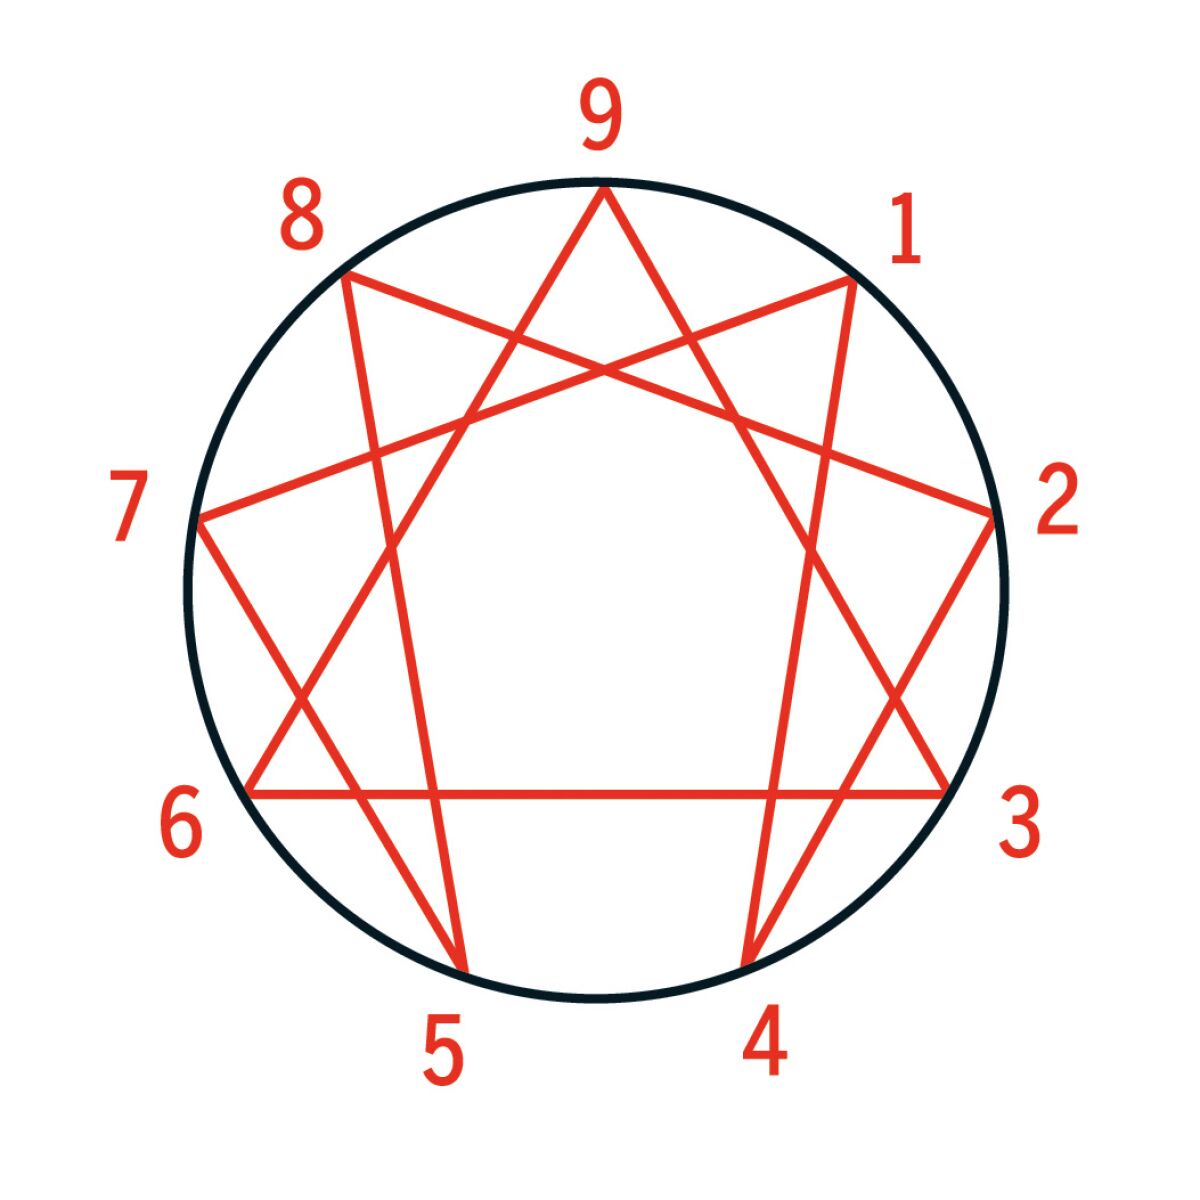 Think of the lines on the Enneagram figure as arrows explaining the directions each personality type moves in times of stress and growth. So, when a Nine is stressed, they resemble an unhealthy Six, but when they're thriving, they look like a healthy Three.